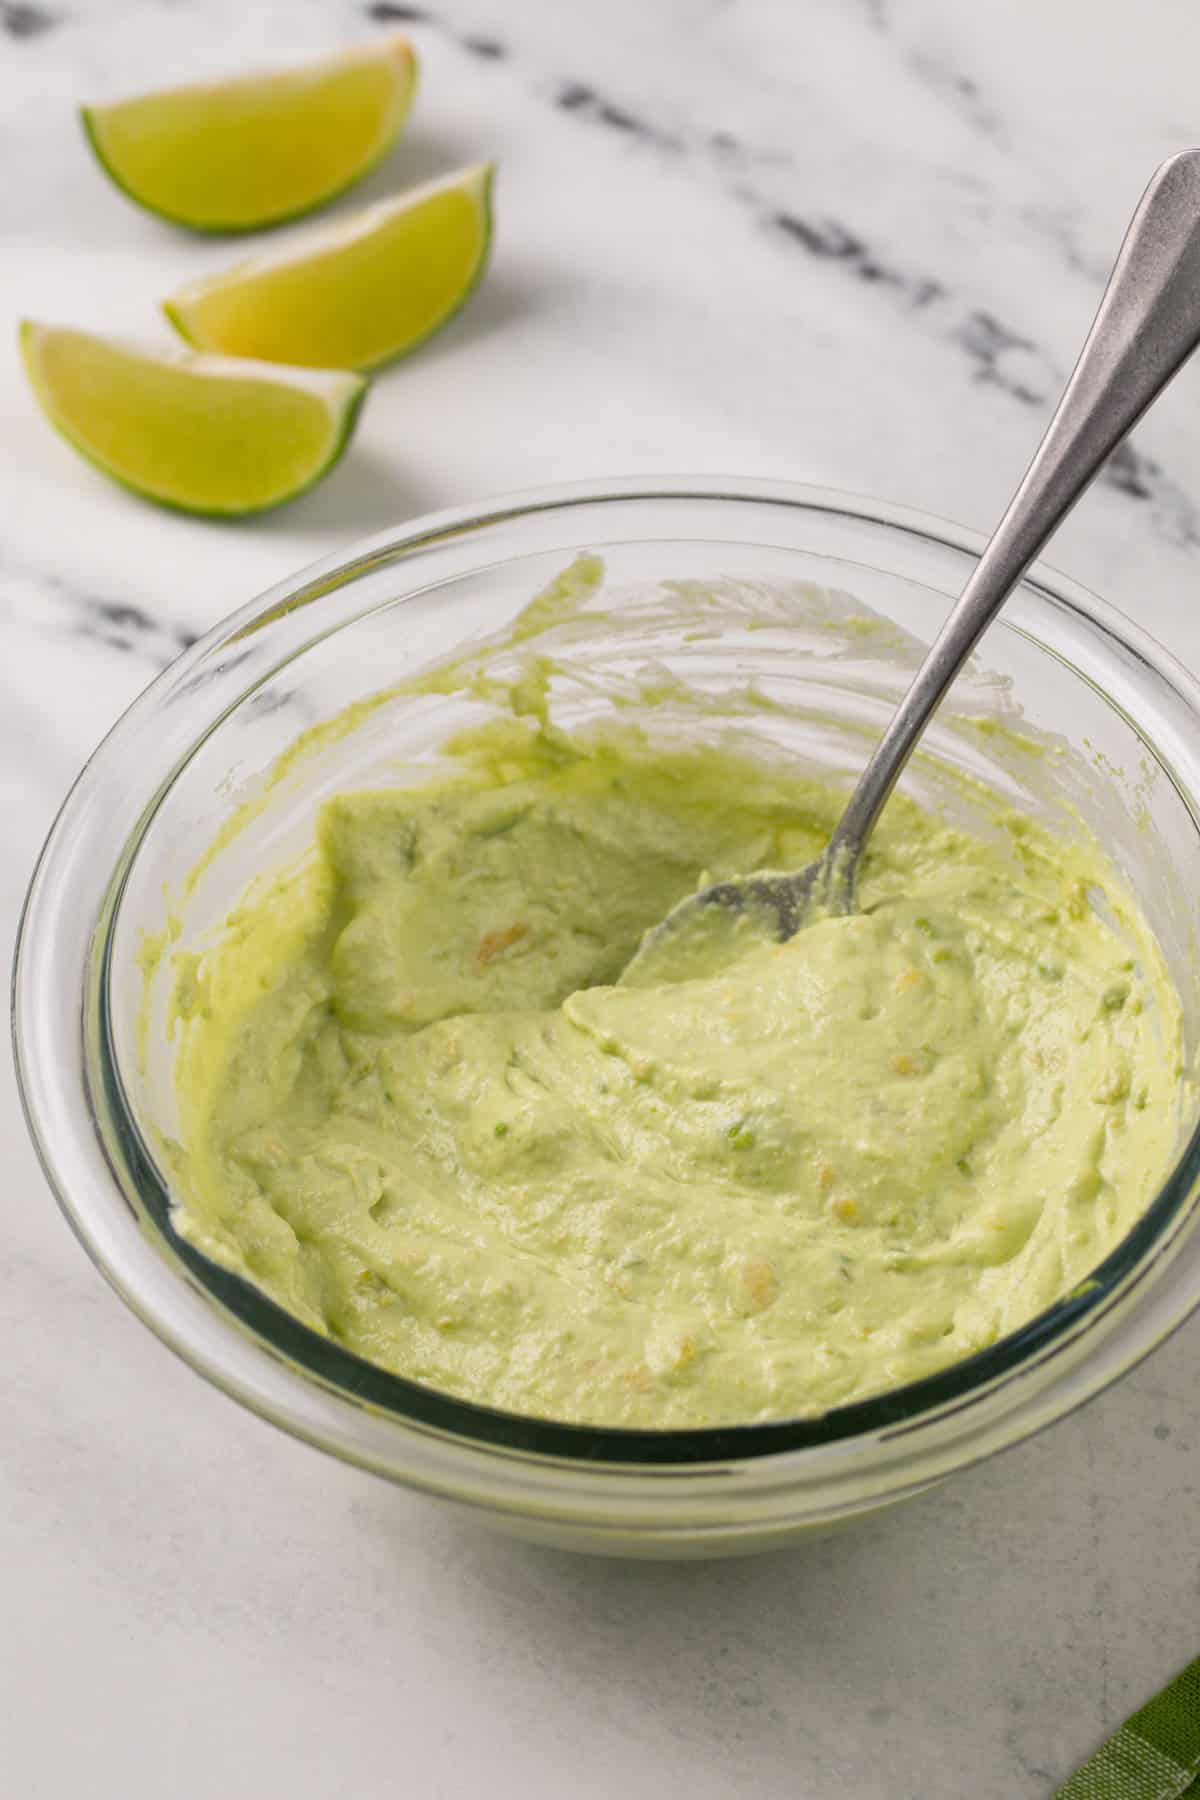 Avocado crema being stirred together in a glass bowl.